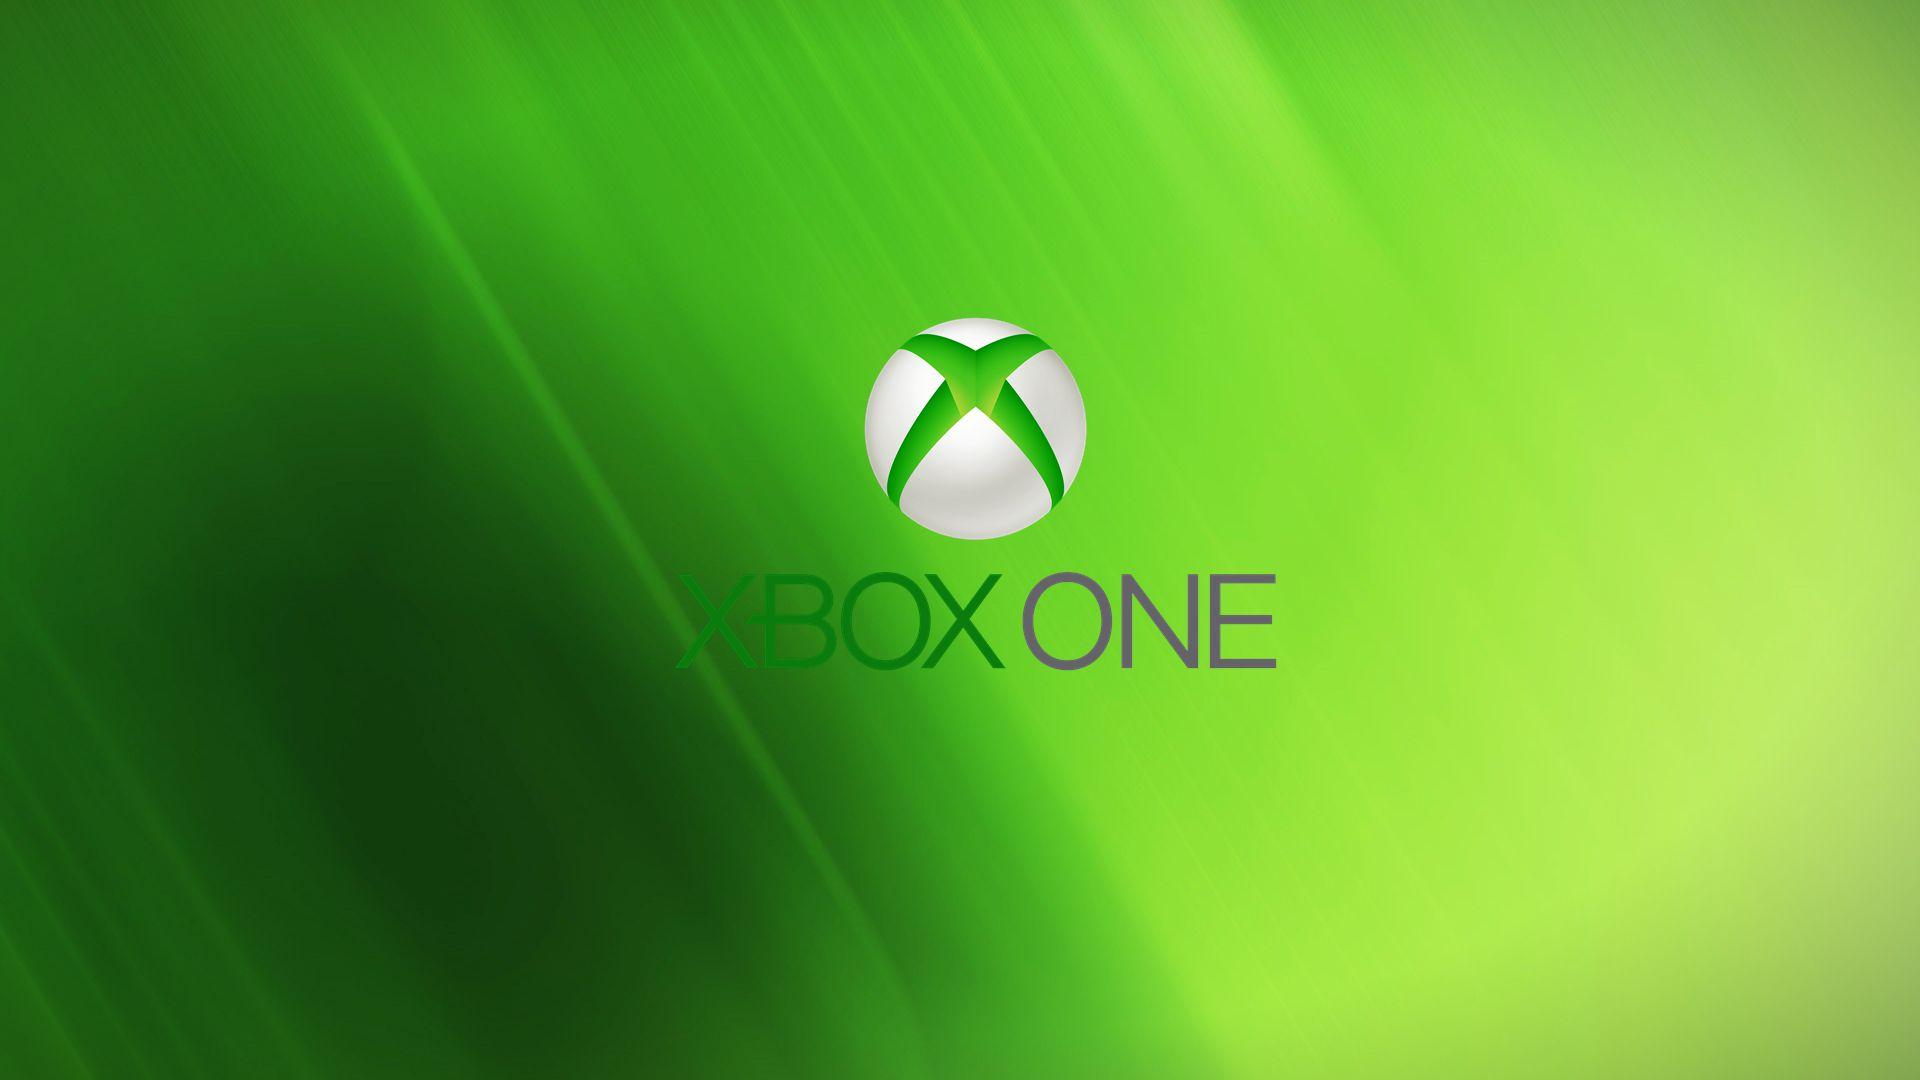 Xbox One Logo HD Wallpaper, Background Image